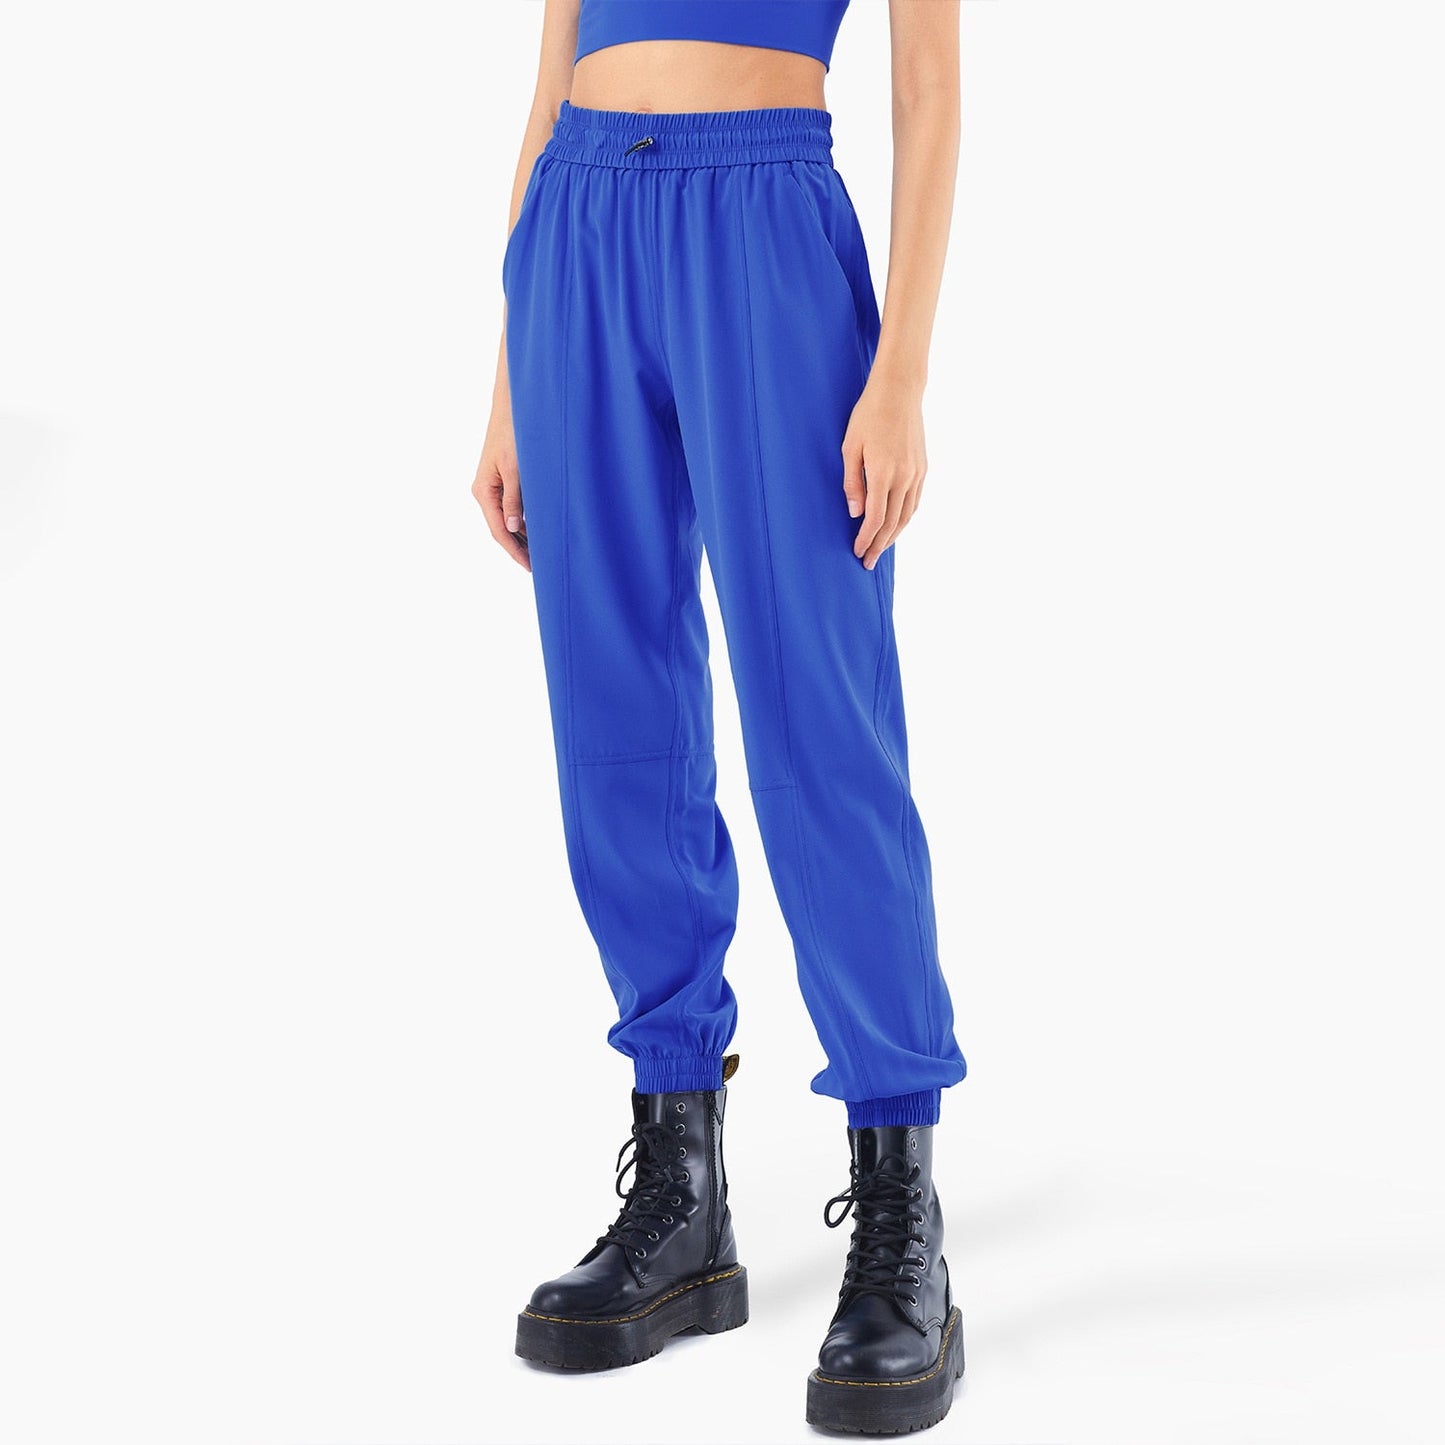 LOOSE TRAINING TROUSERS - S / BLUE